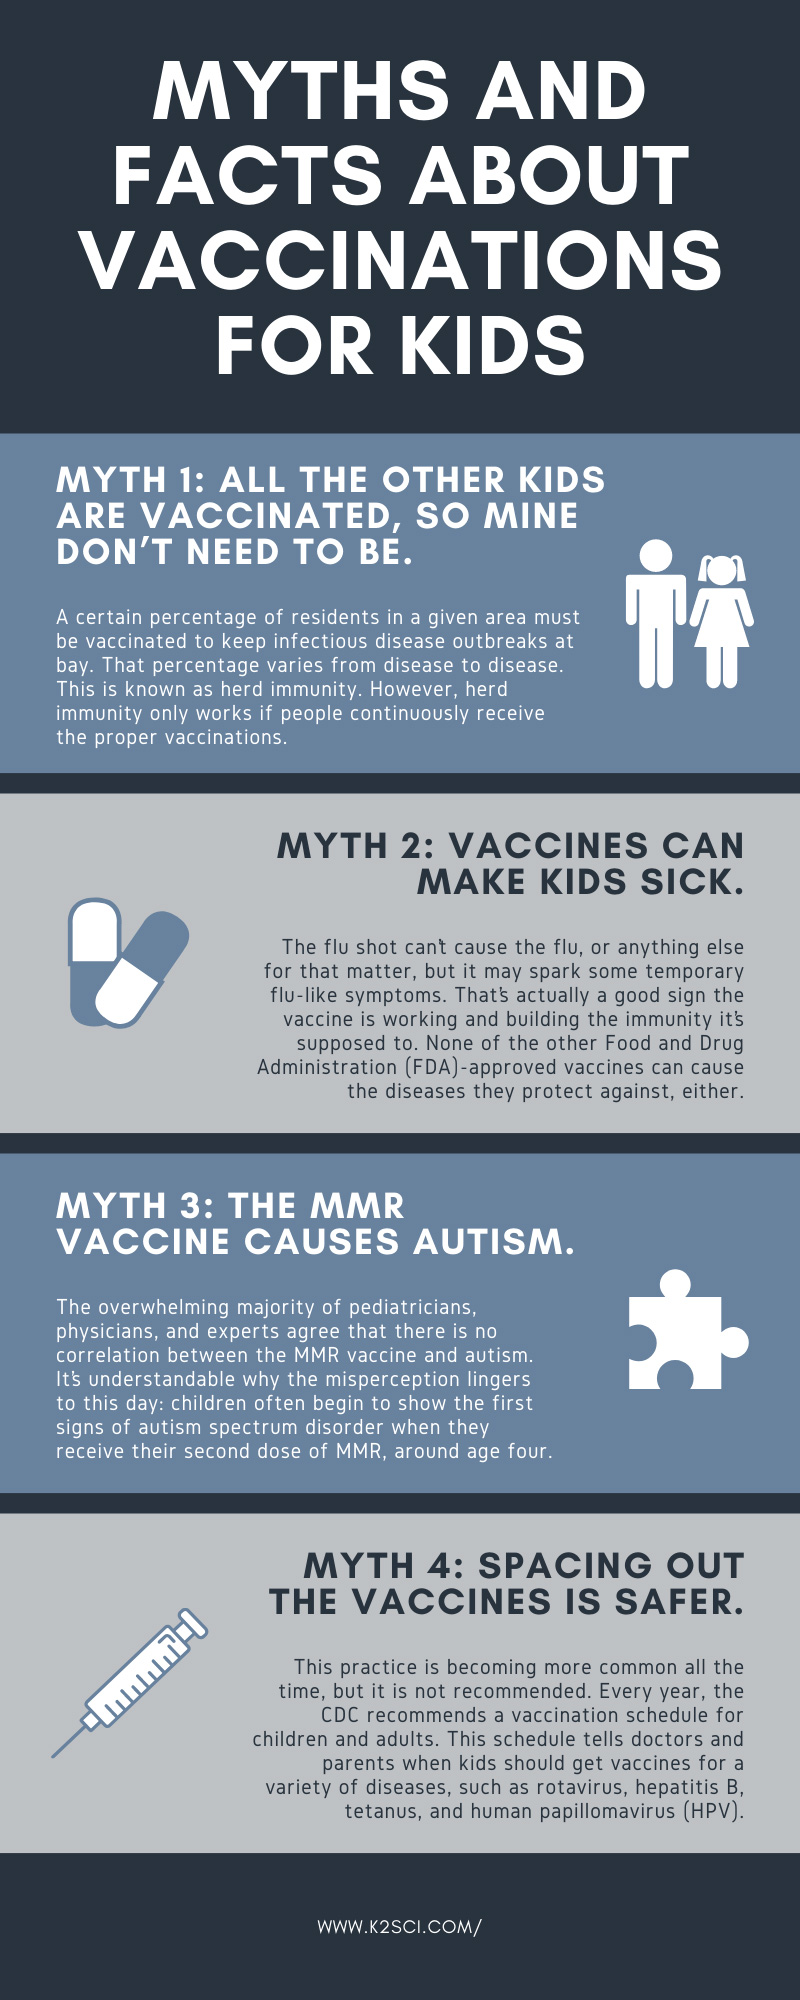 Myths and Facts About Vaccinations for Kids infographic